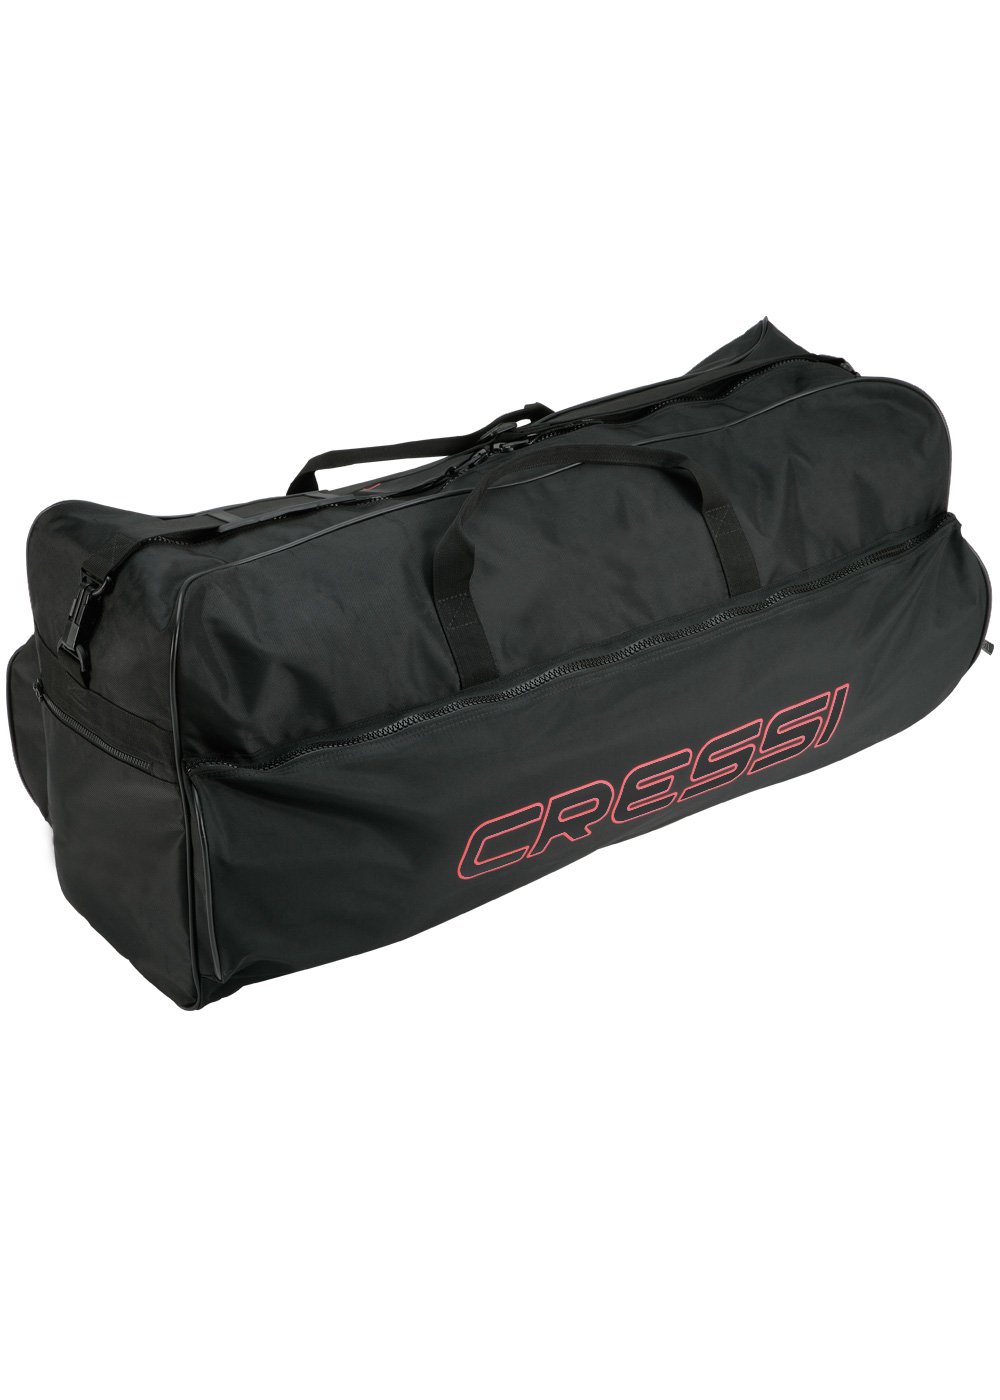 Buy a Spearfishing Bag for Convenient Underwater Transport